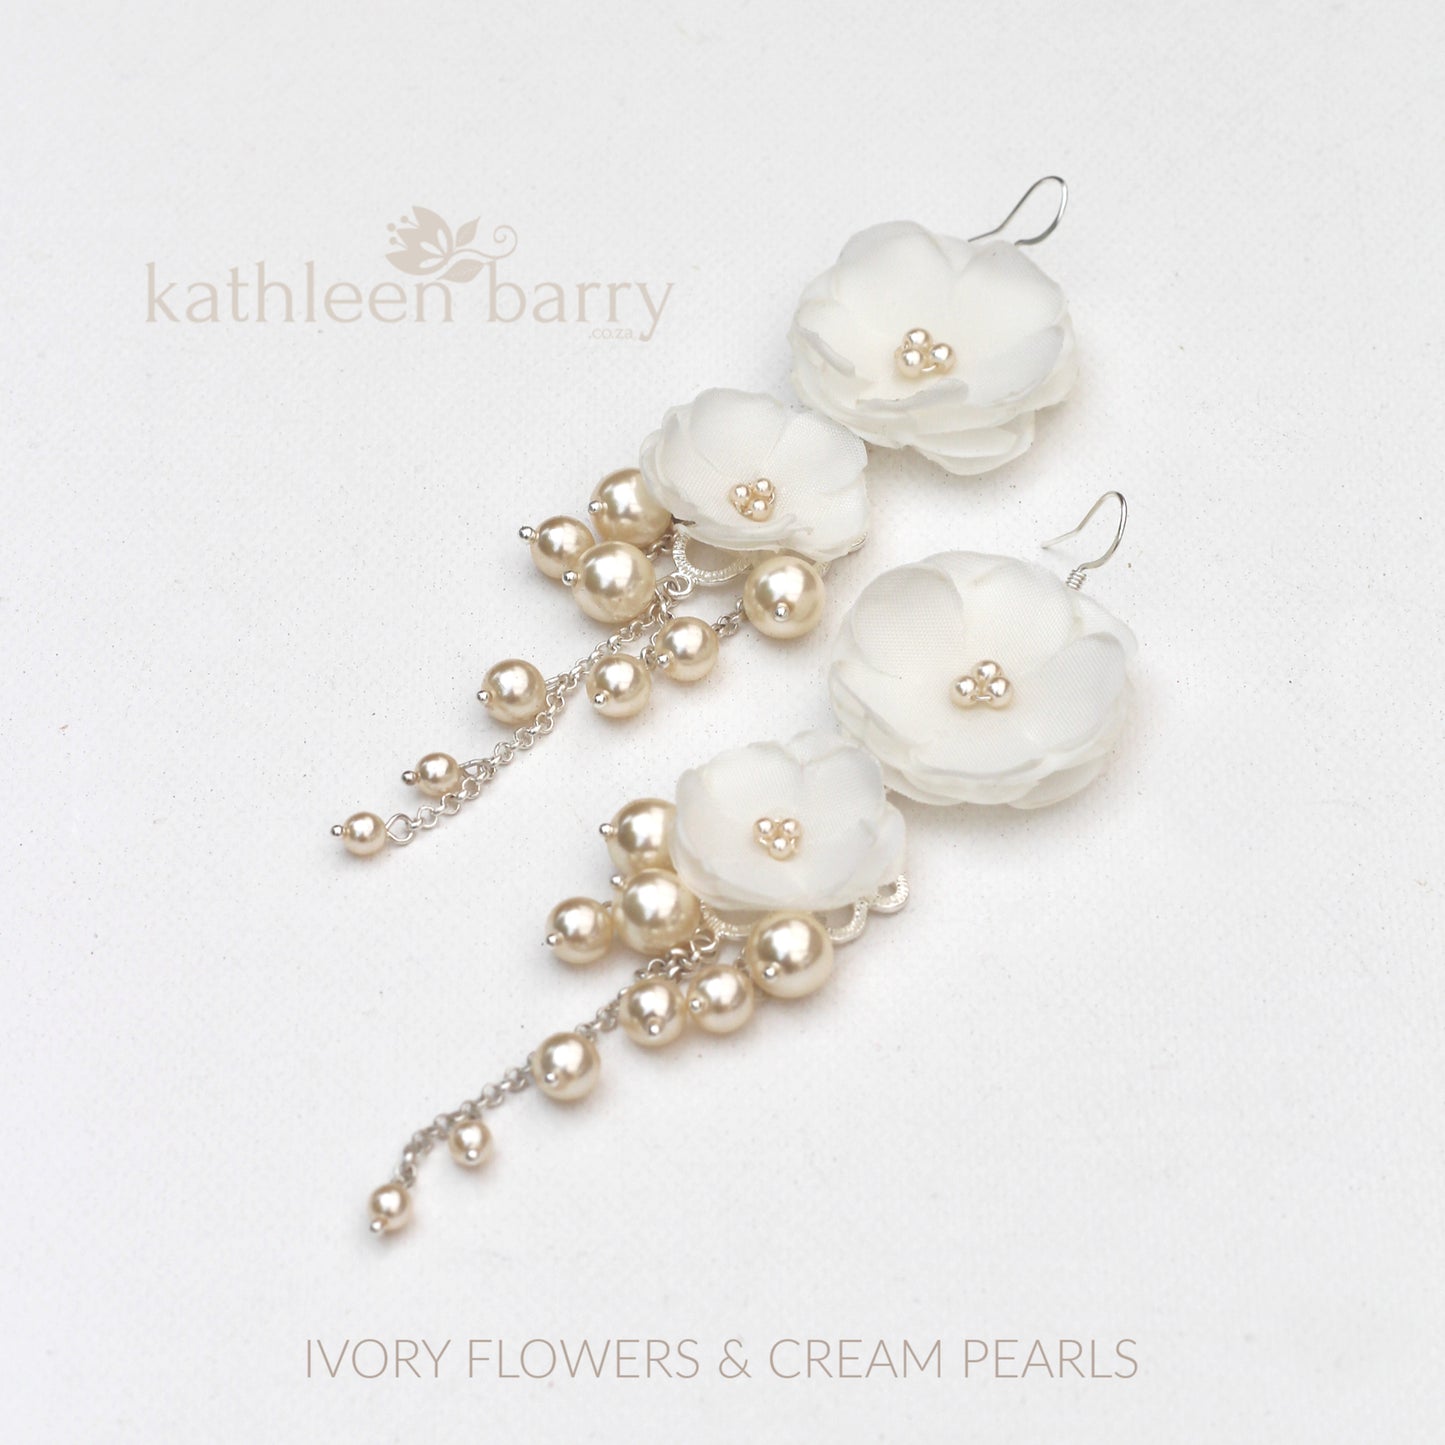 Odette flower and pearl chandelier statement earrings -  Color options available